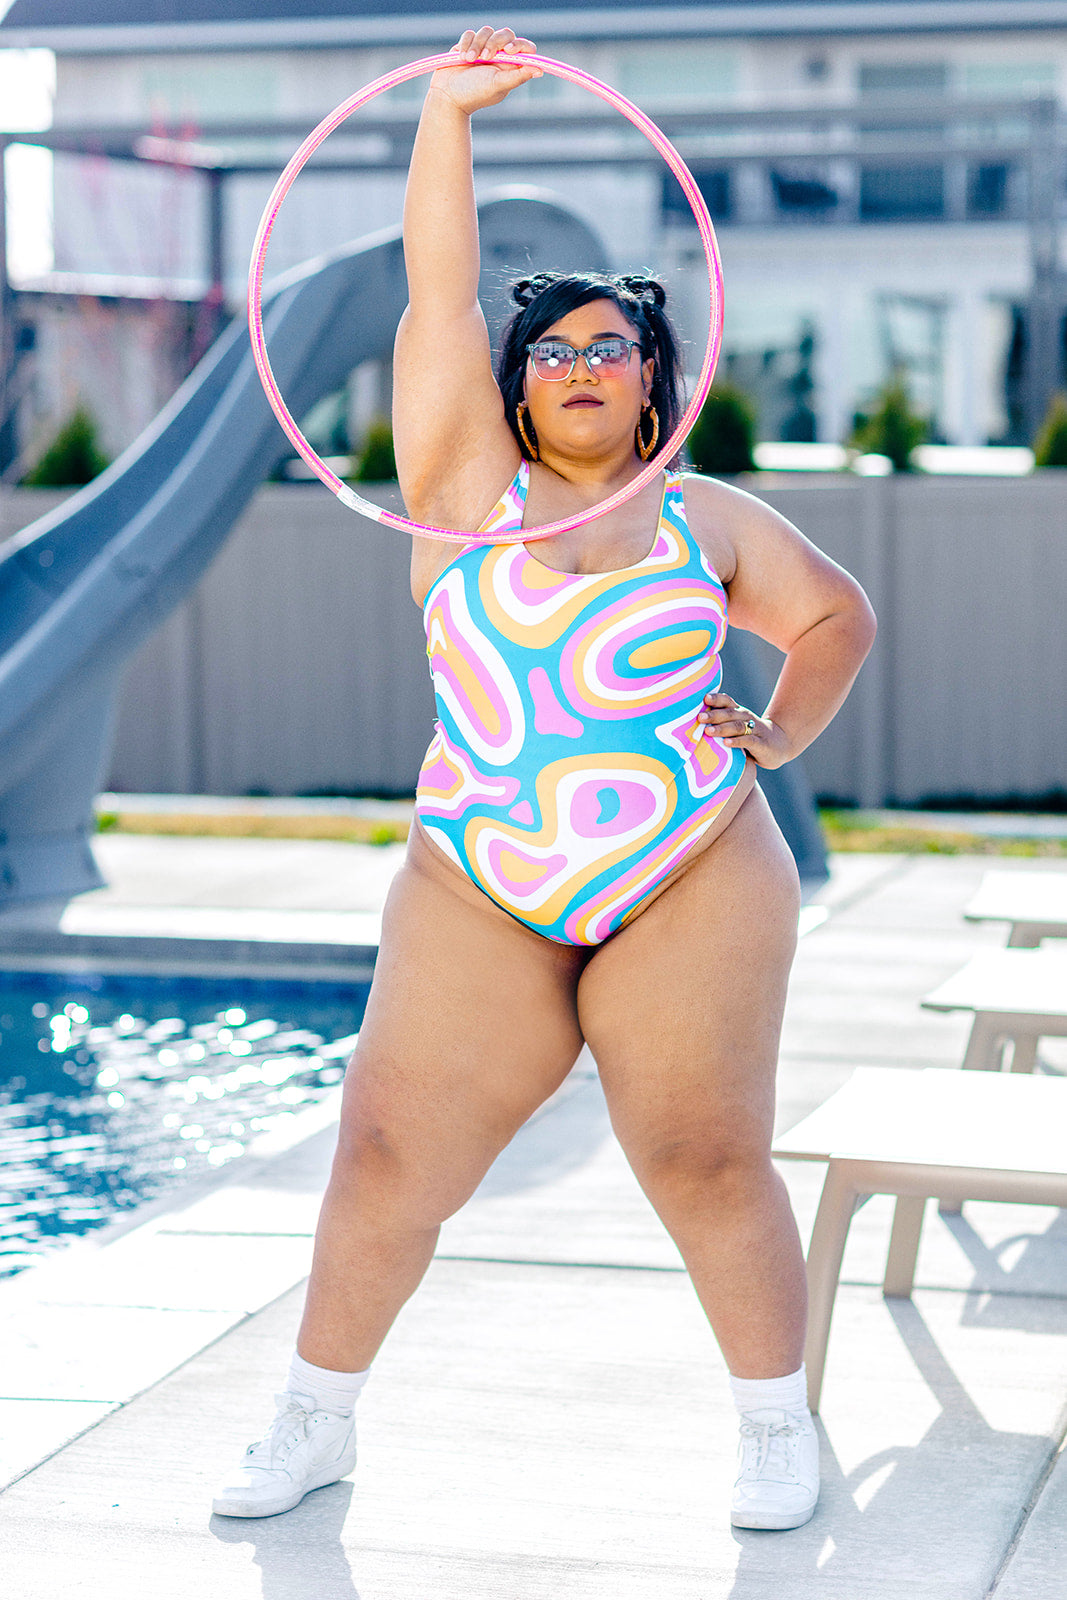 TABY ORIGINAL DESIGN: Catch You On The Flip Side REVERSIBLE SWIM IN SIZES XS-5X***